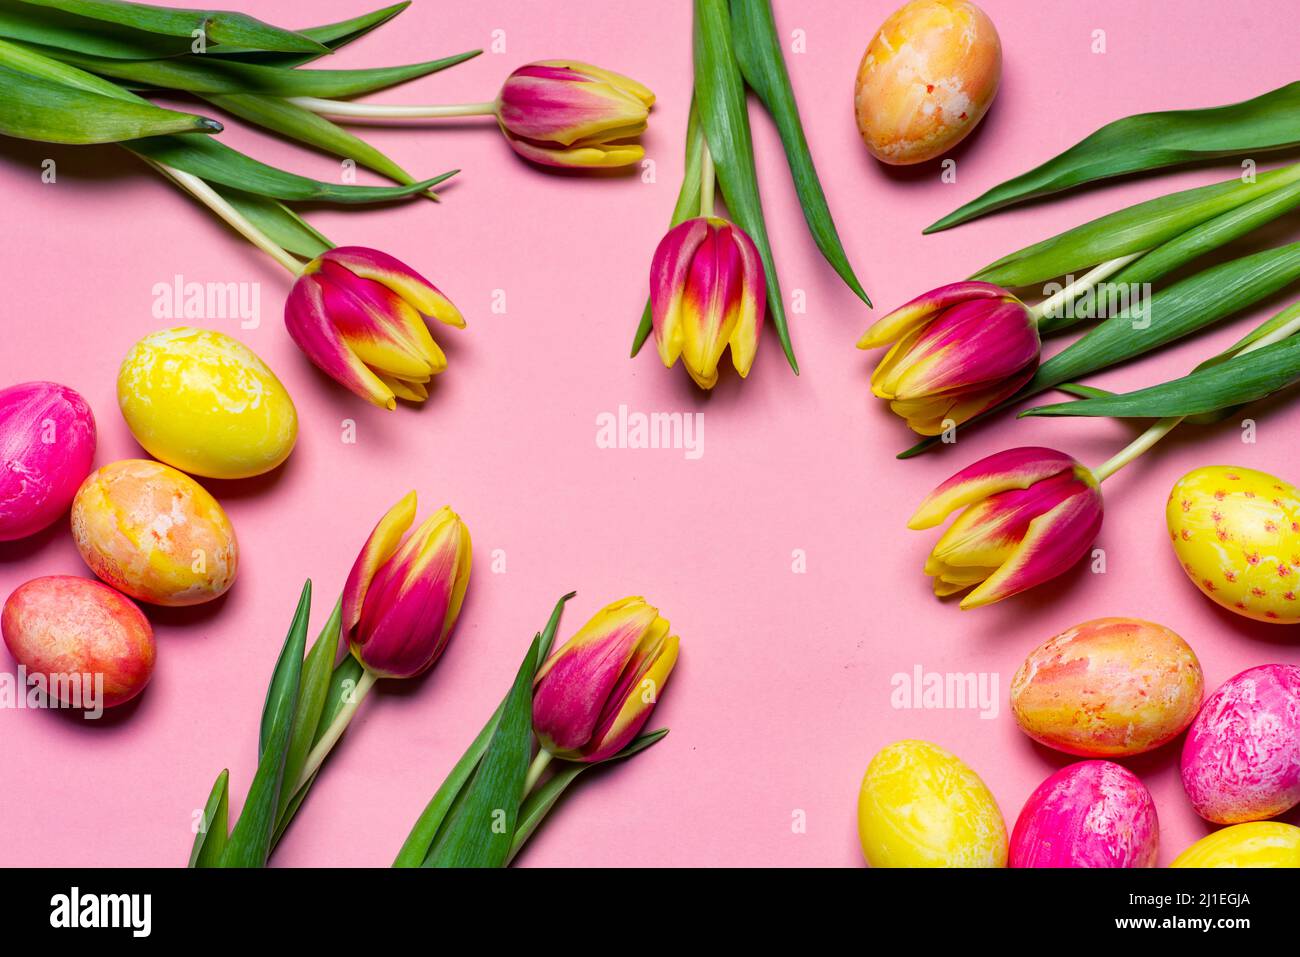 Colorful red and yellow tulips with hand painted Easter eggs on pink background top view with copy space Stock Photo